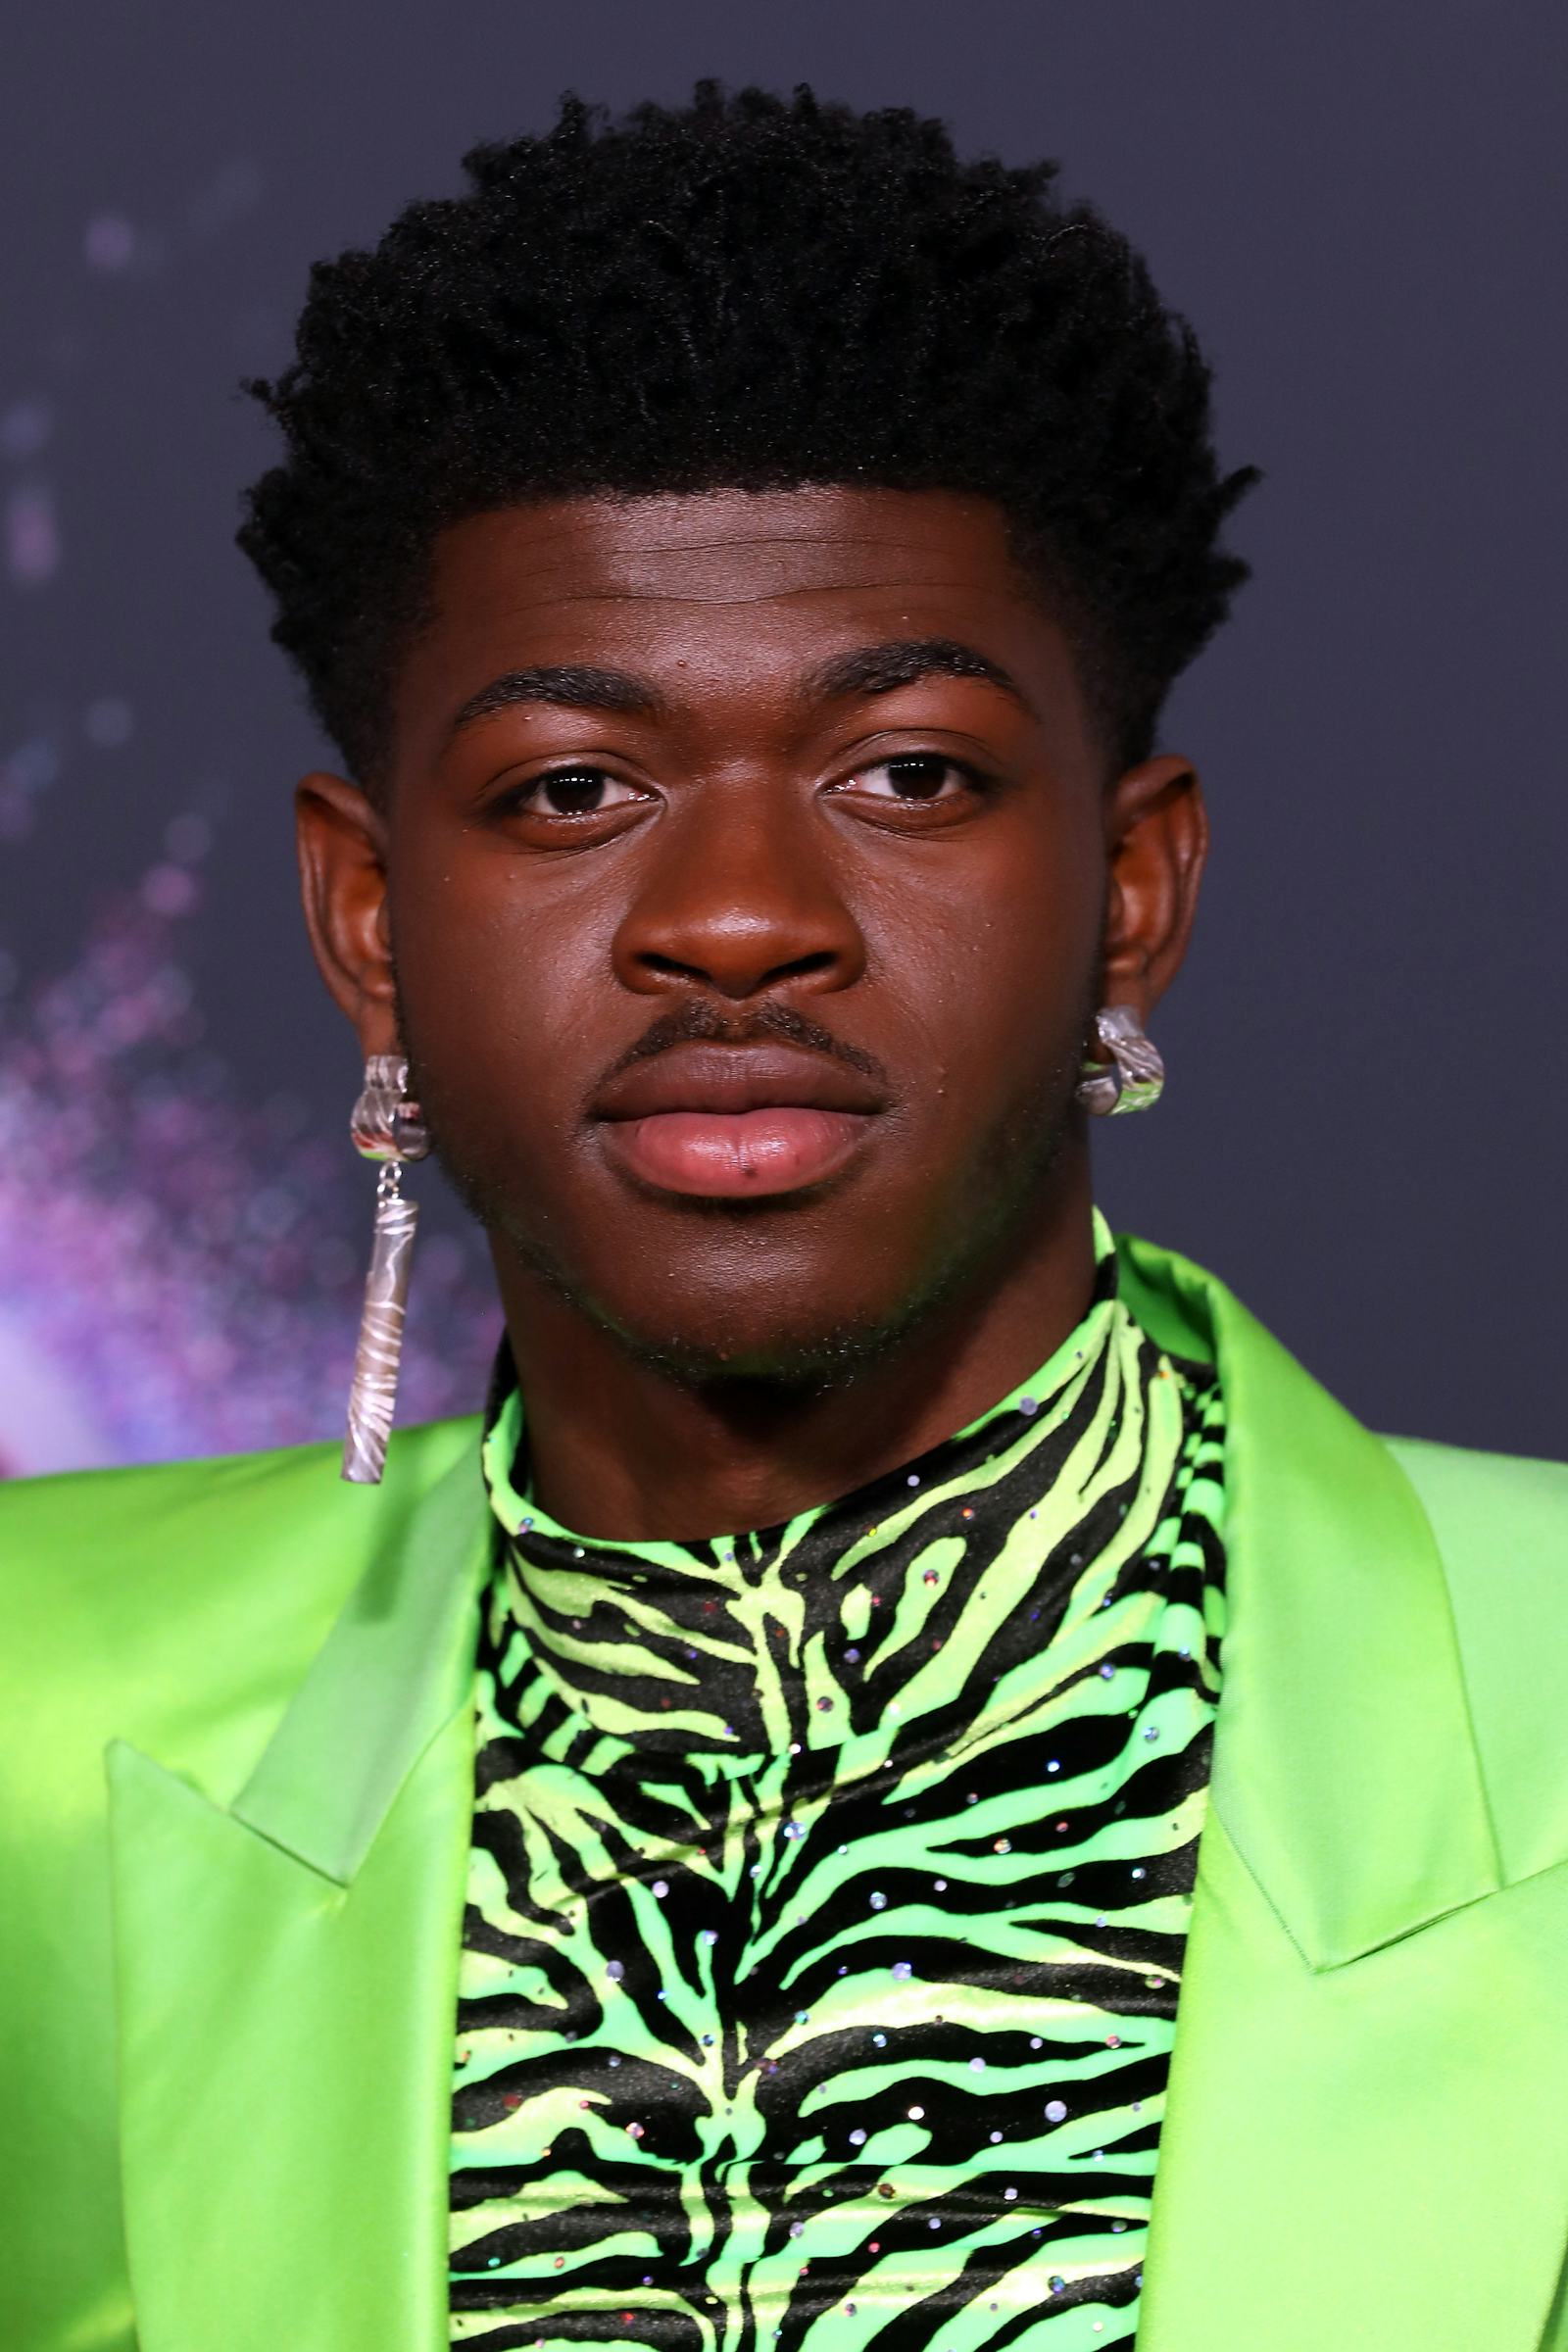 Lil Nas X Opened Up About 2019 Being A Tough Year, Despite His Successes